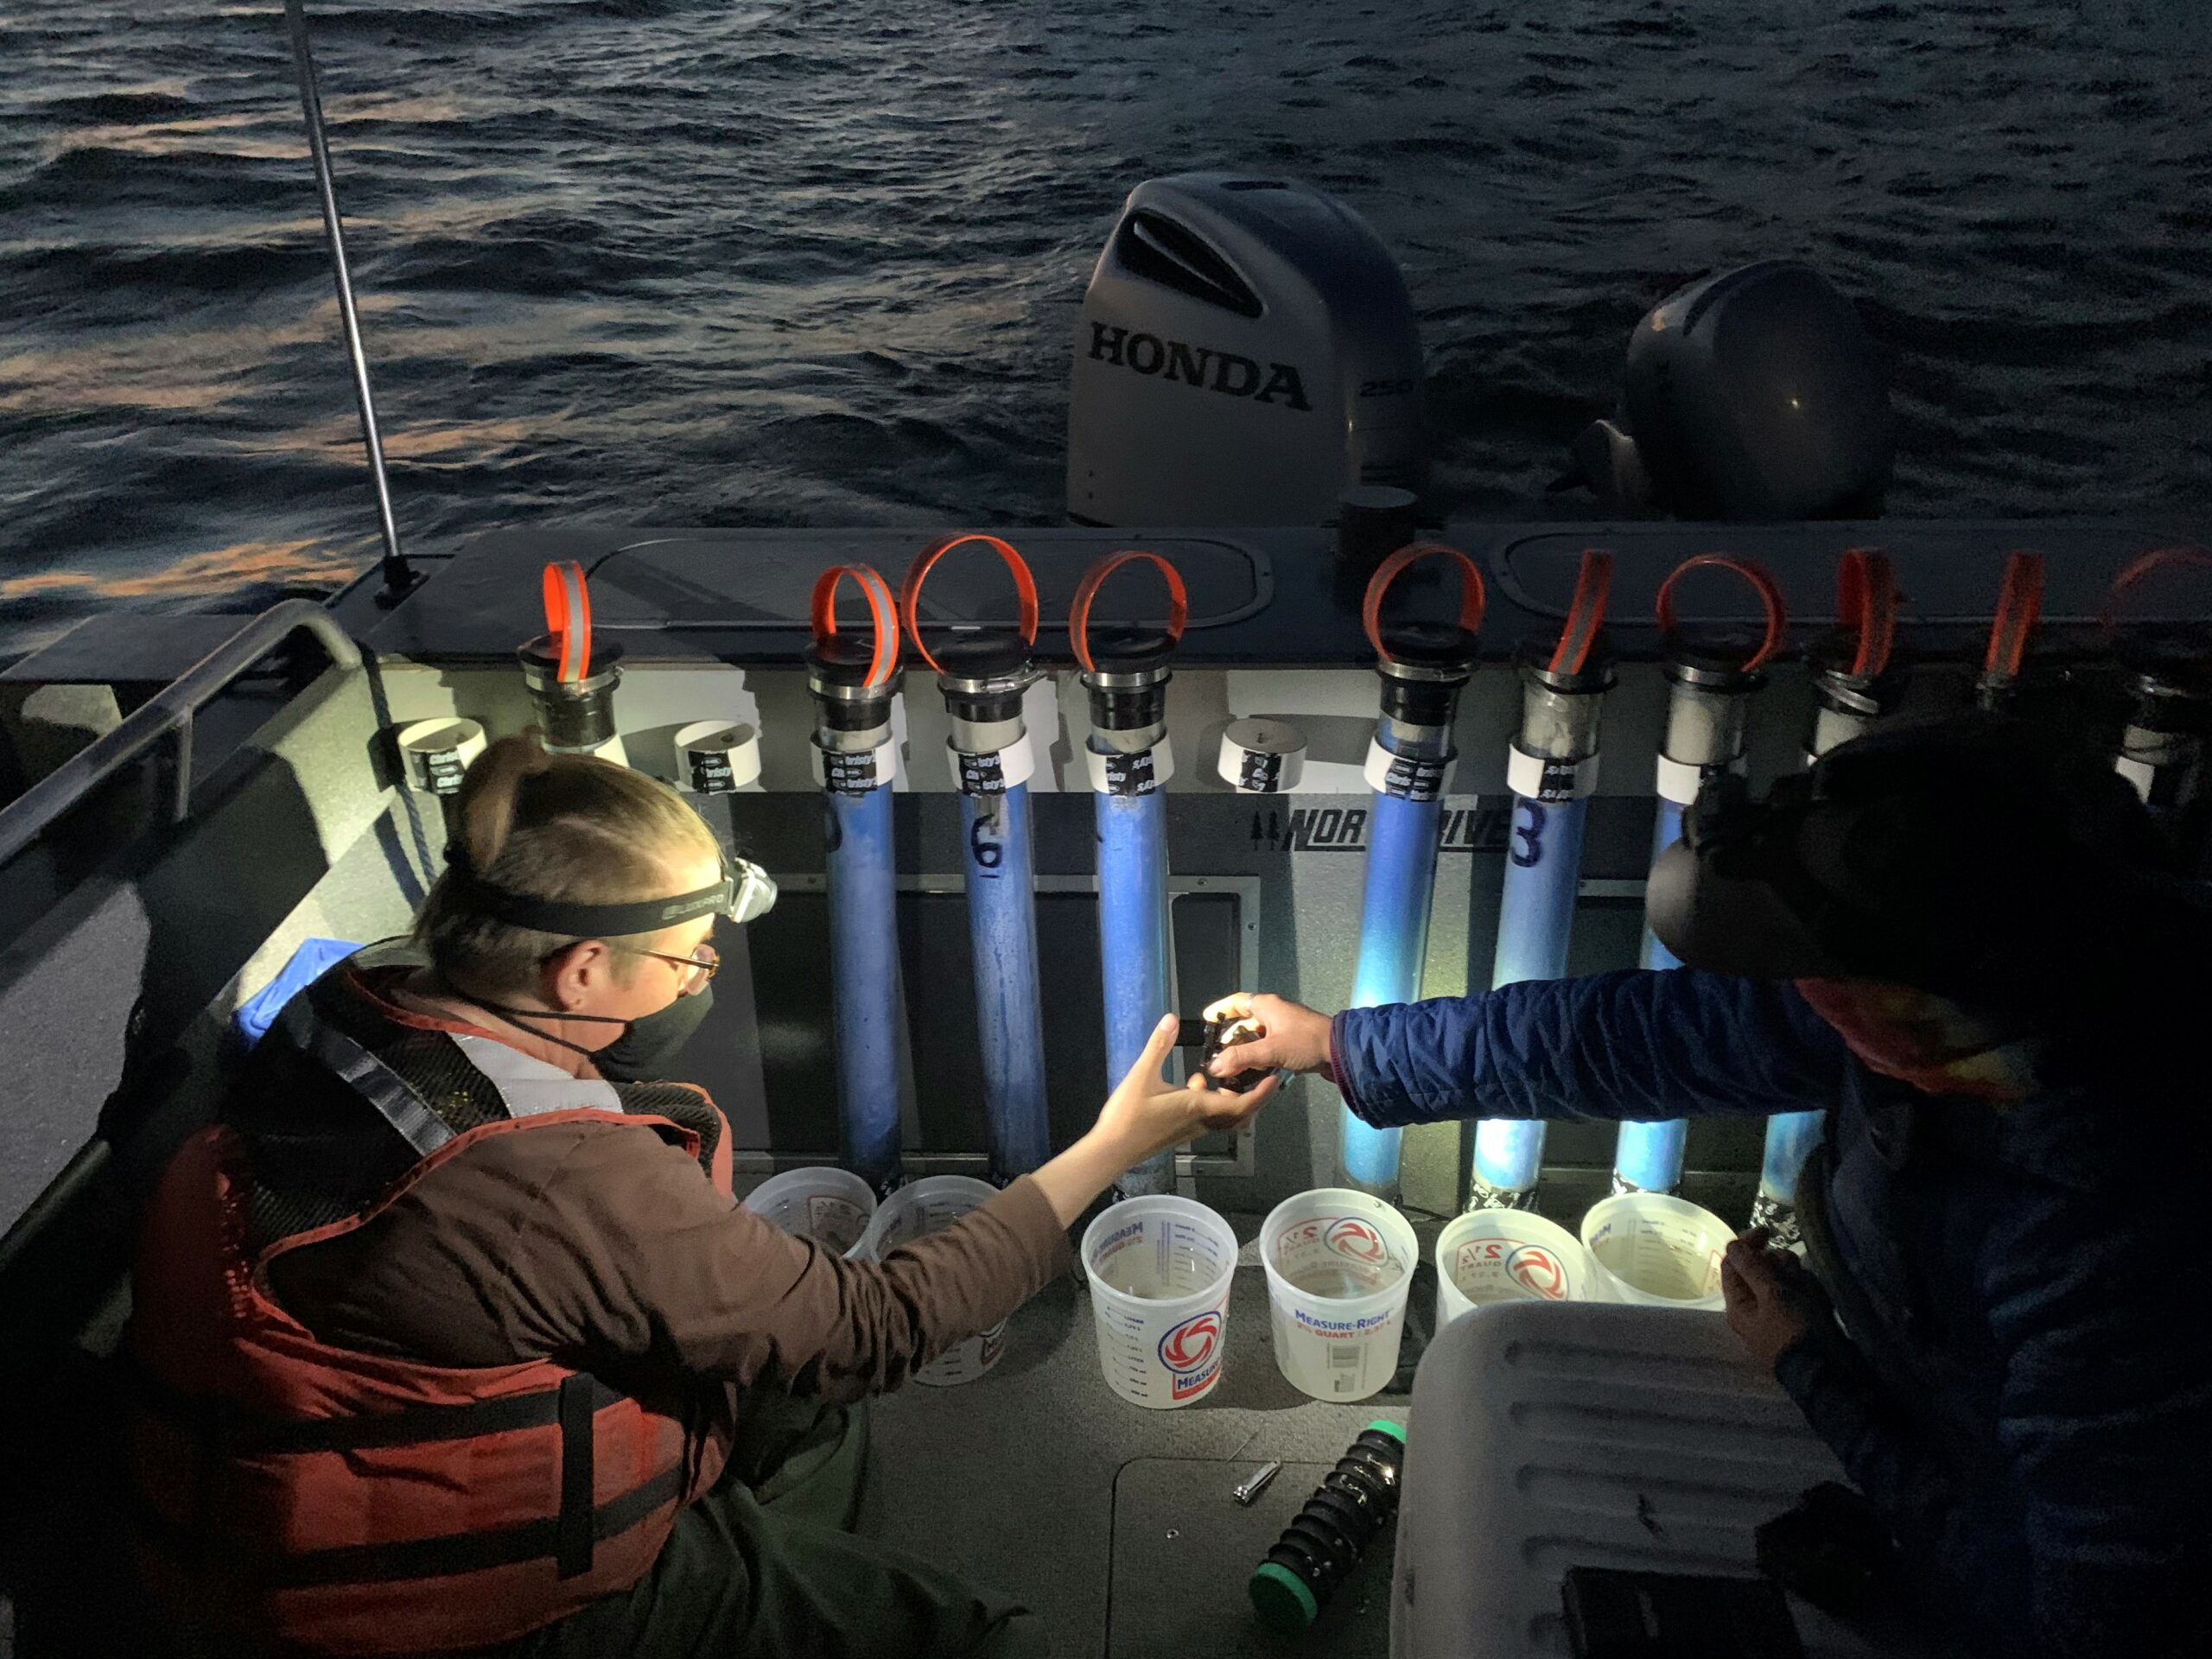 PERs Units being prepared for use on a boat at night by two scientists.